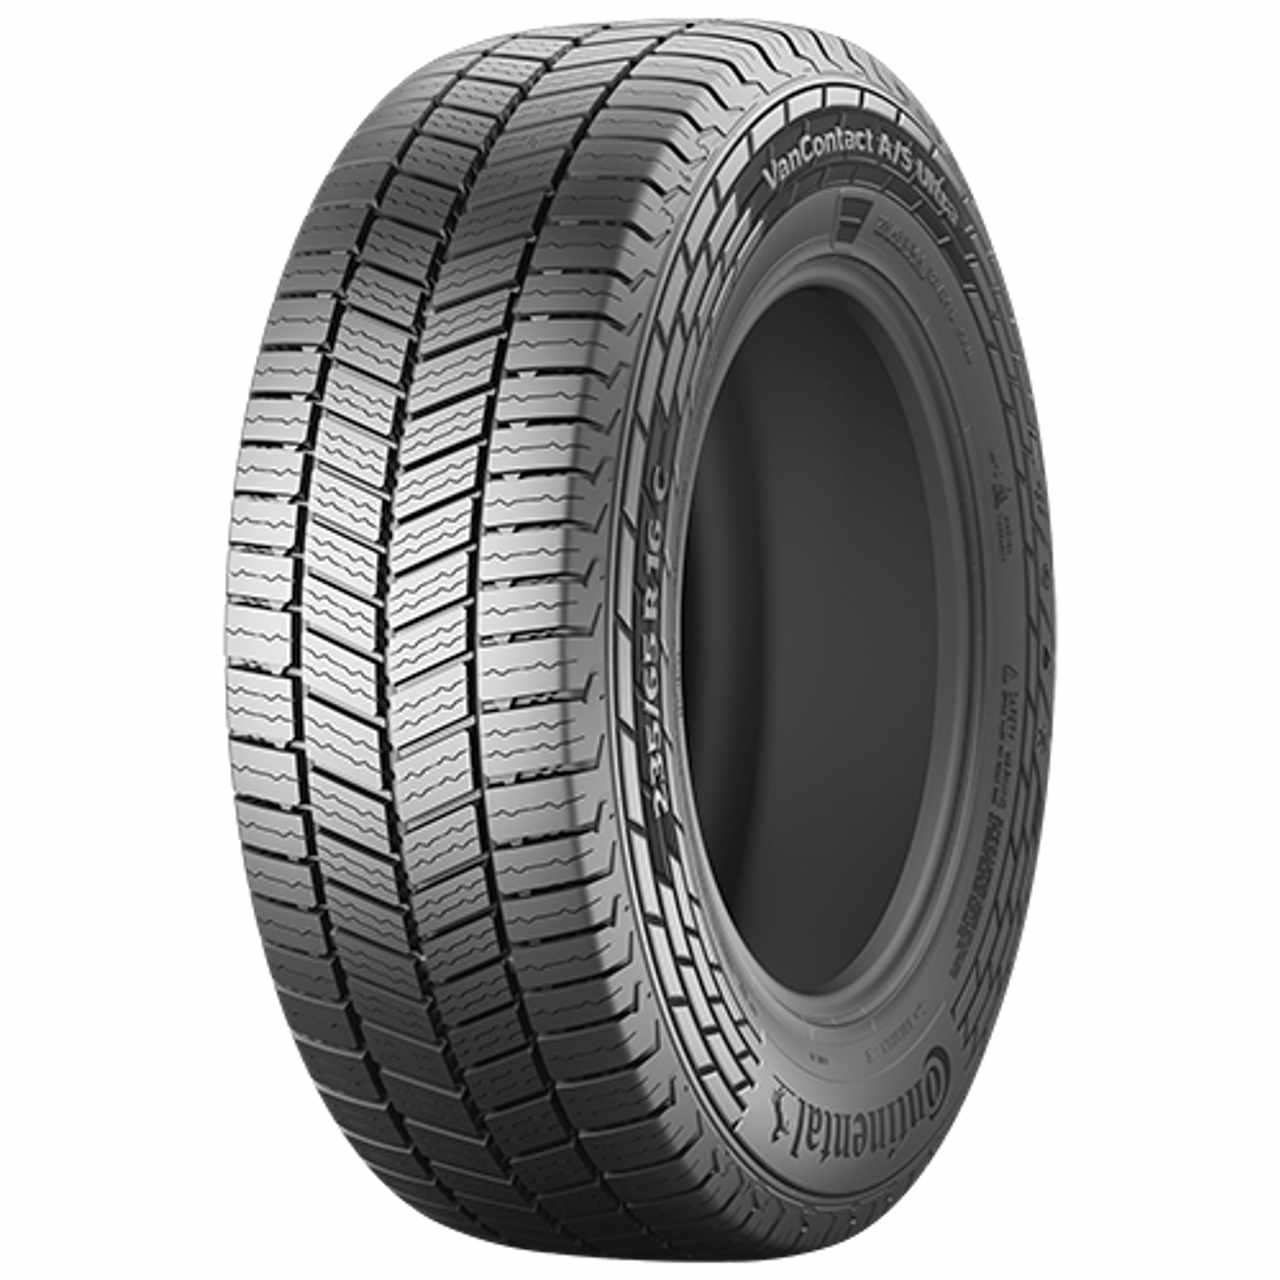 CONTINENTAL VANCONTACT A/S ULTRA 225/70R15C 112S BSW von Continental